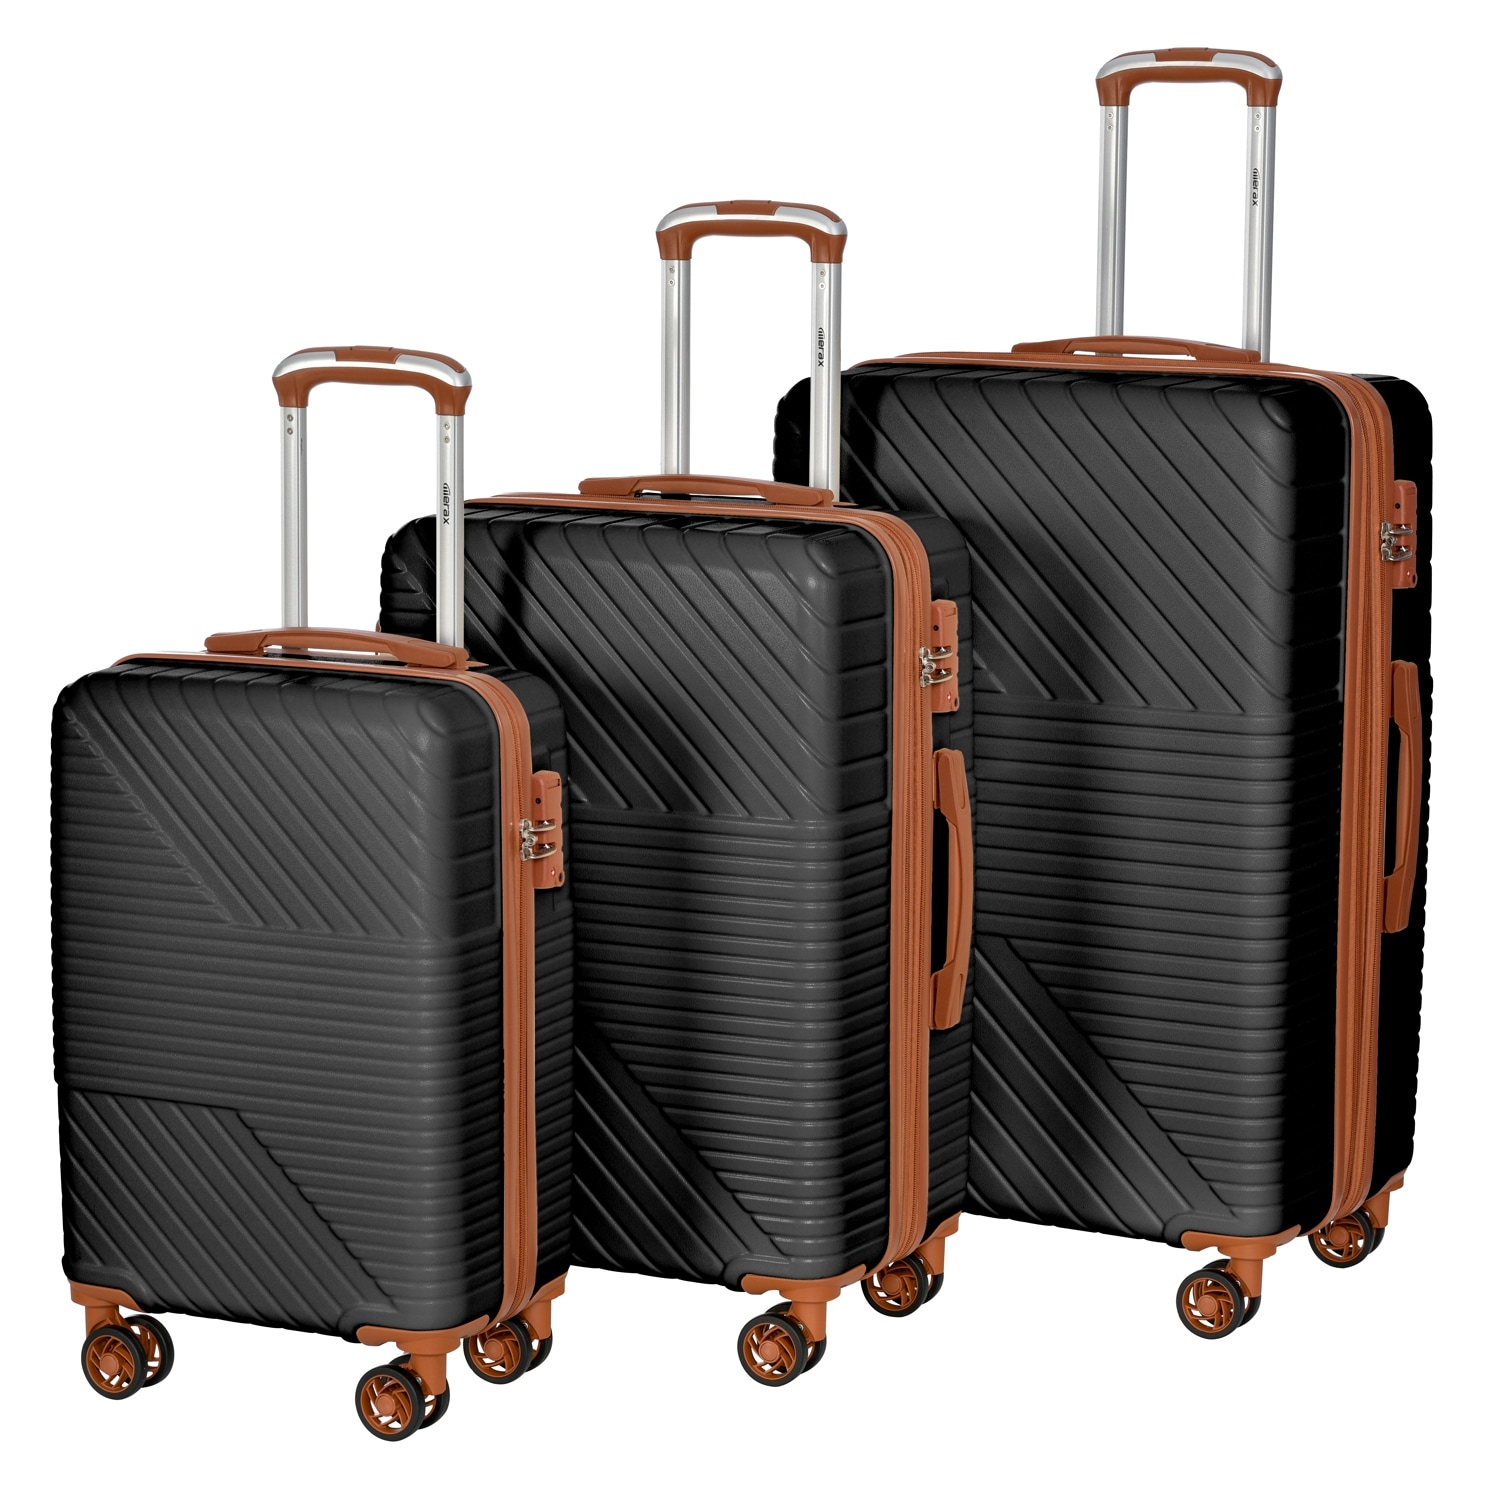 20" 24" 28" Travel luggage Bag Set of 3 Trolley Hard Shell  Suitcase W/Coded Lock